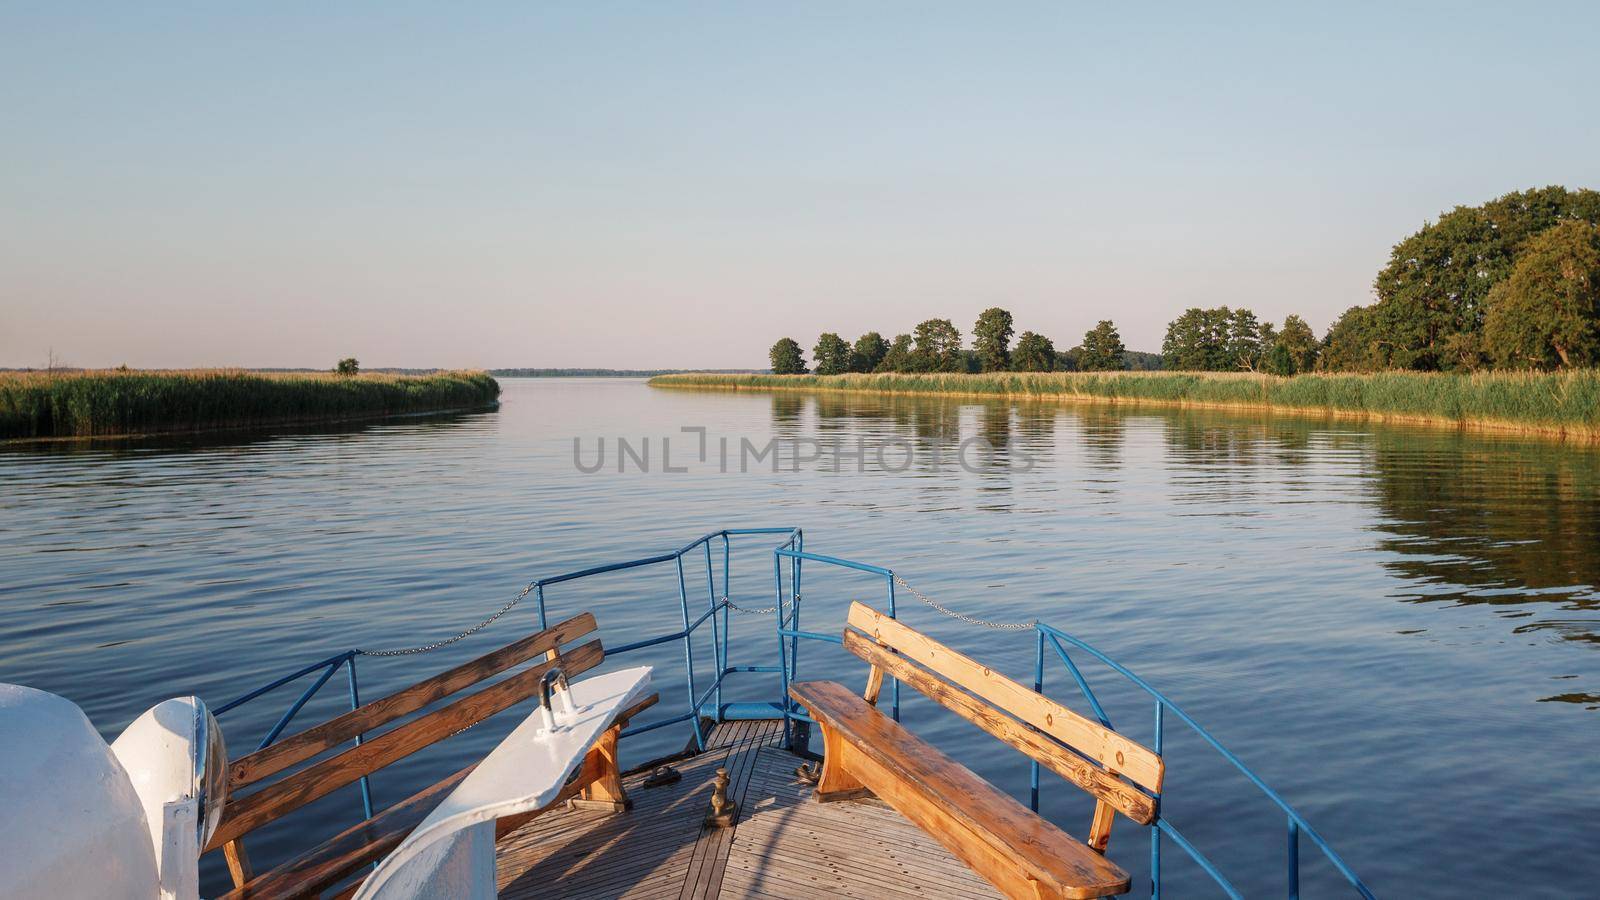 Landscape with boat front and river delta on a warm summer evening